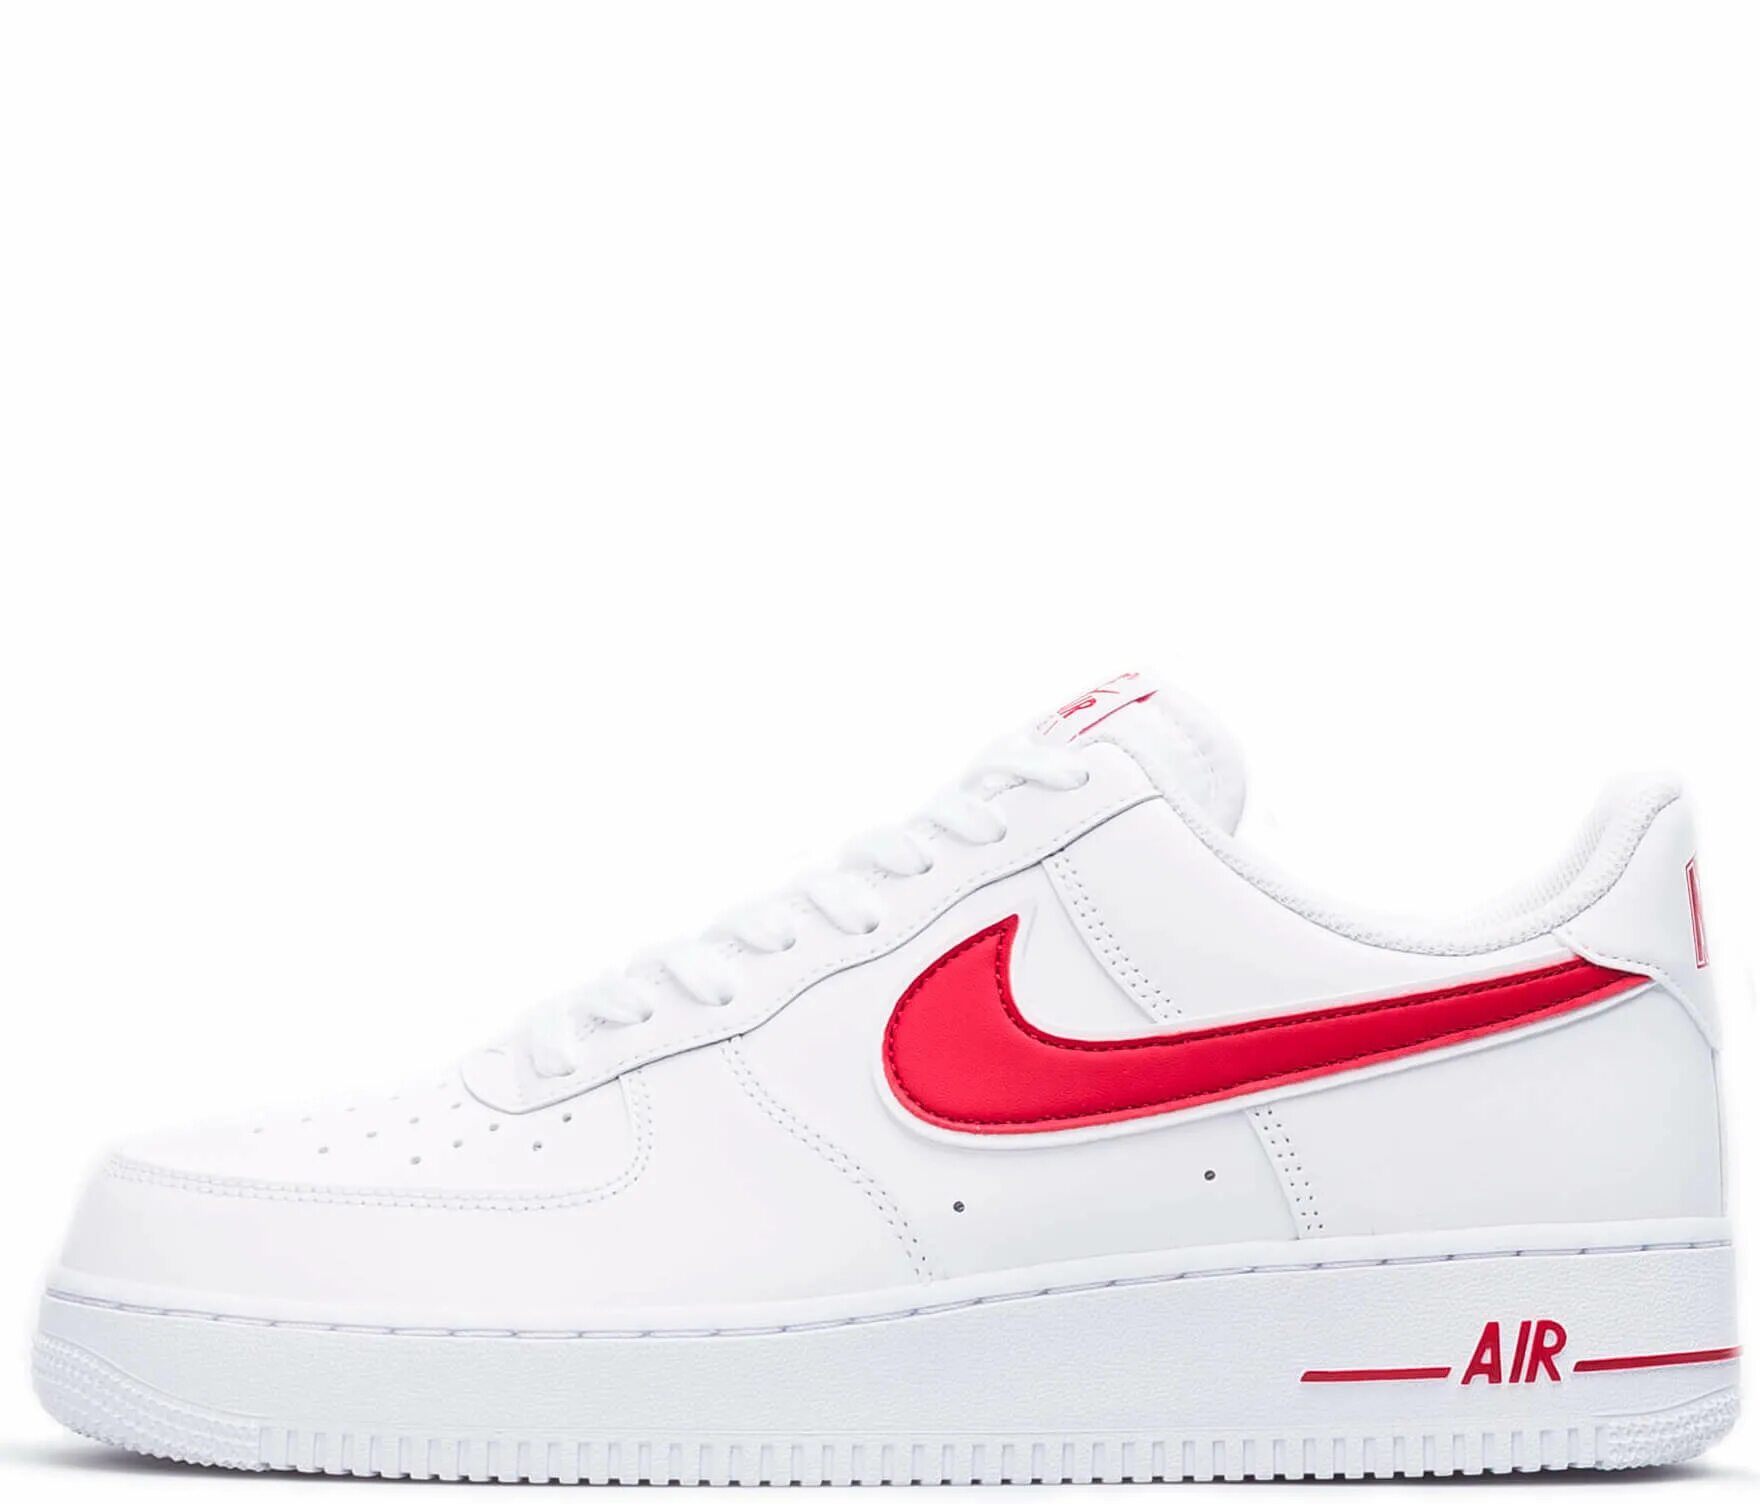 Nike Air Force 1 Low White Red. Nike Air Force 1 lv8 White/Red. Nike Air Force 1 White Red. Nike Air Force 1 lv8 White. Кроссовки nike air force 1 lv8